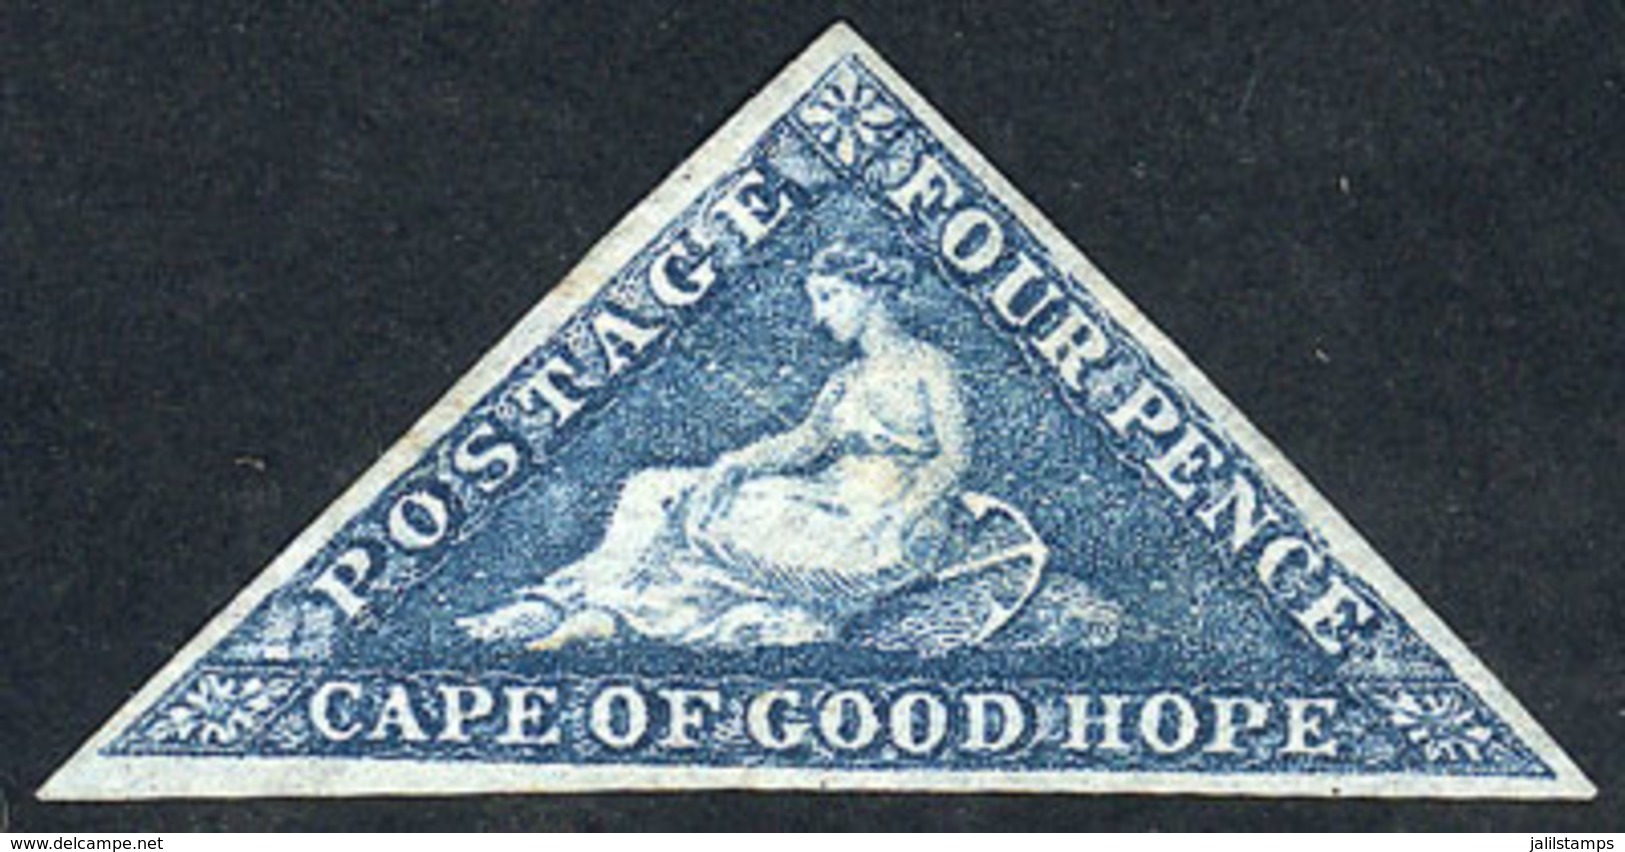 970 CAPE OF GOOD HOPE: Sc.13c, 1863/4 4p. Grayish Blue, Mint Without Gum, Wide Margins, Very Nice! - Africa (Other)